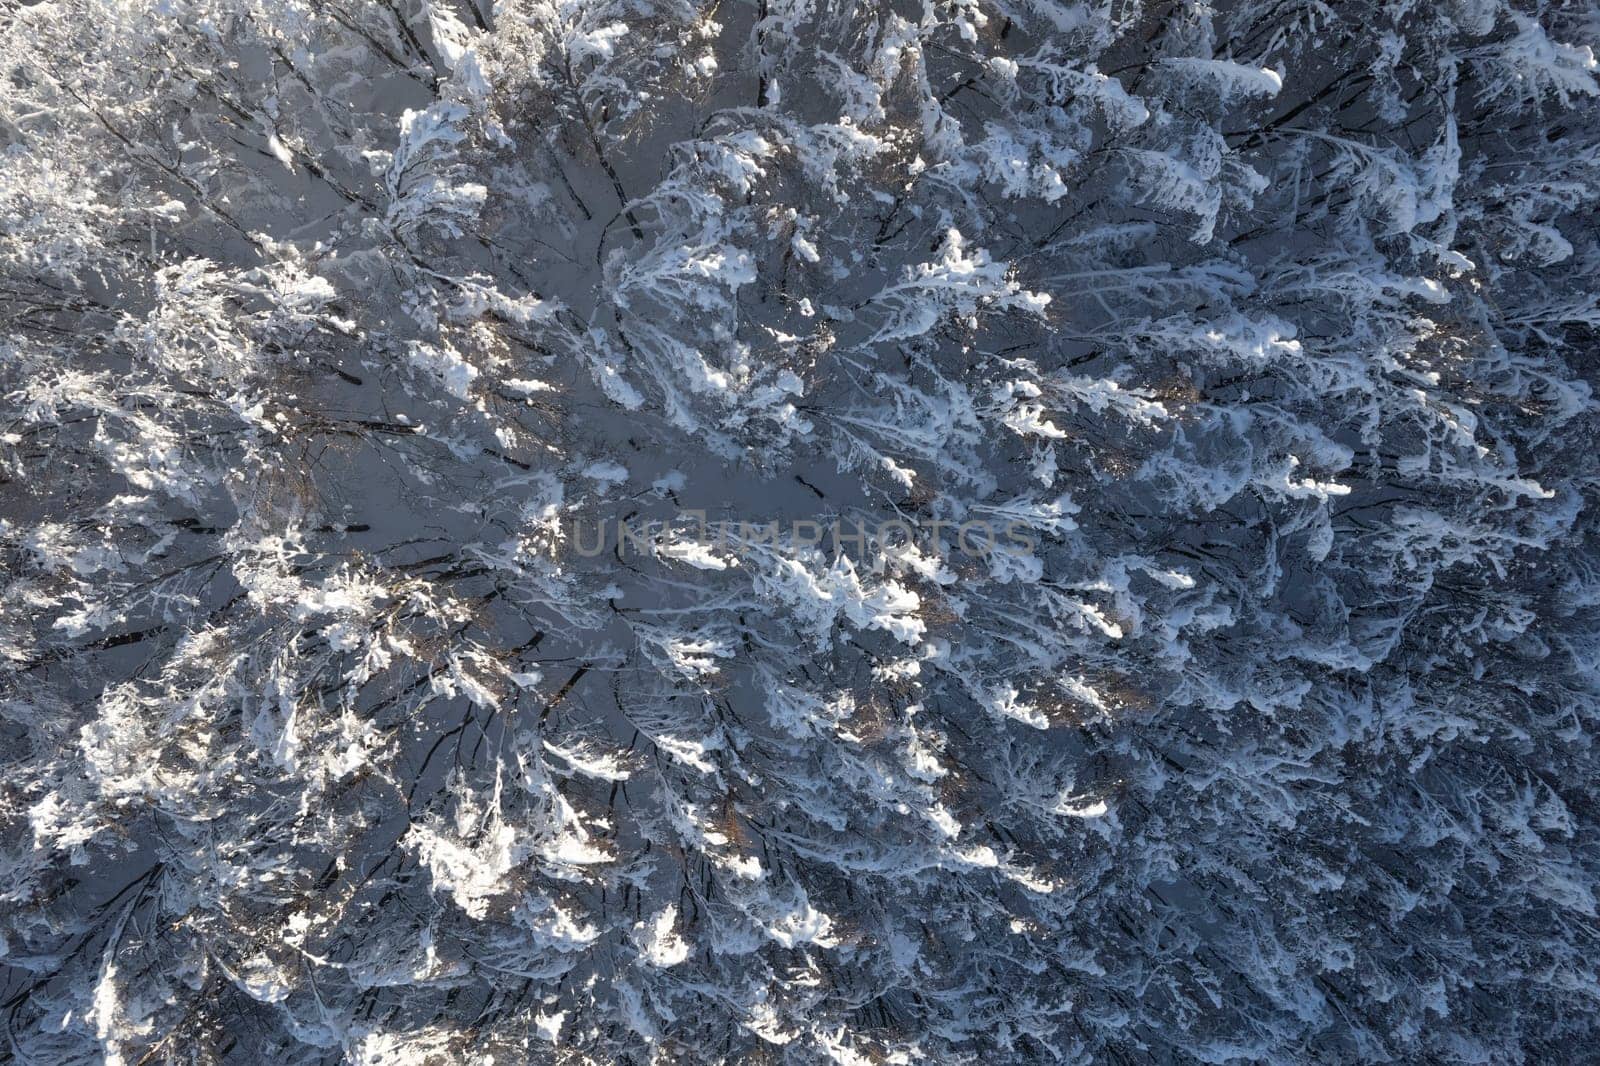 Completely snow-covered forest taken from above by fotografiche.eu